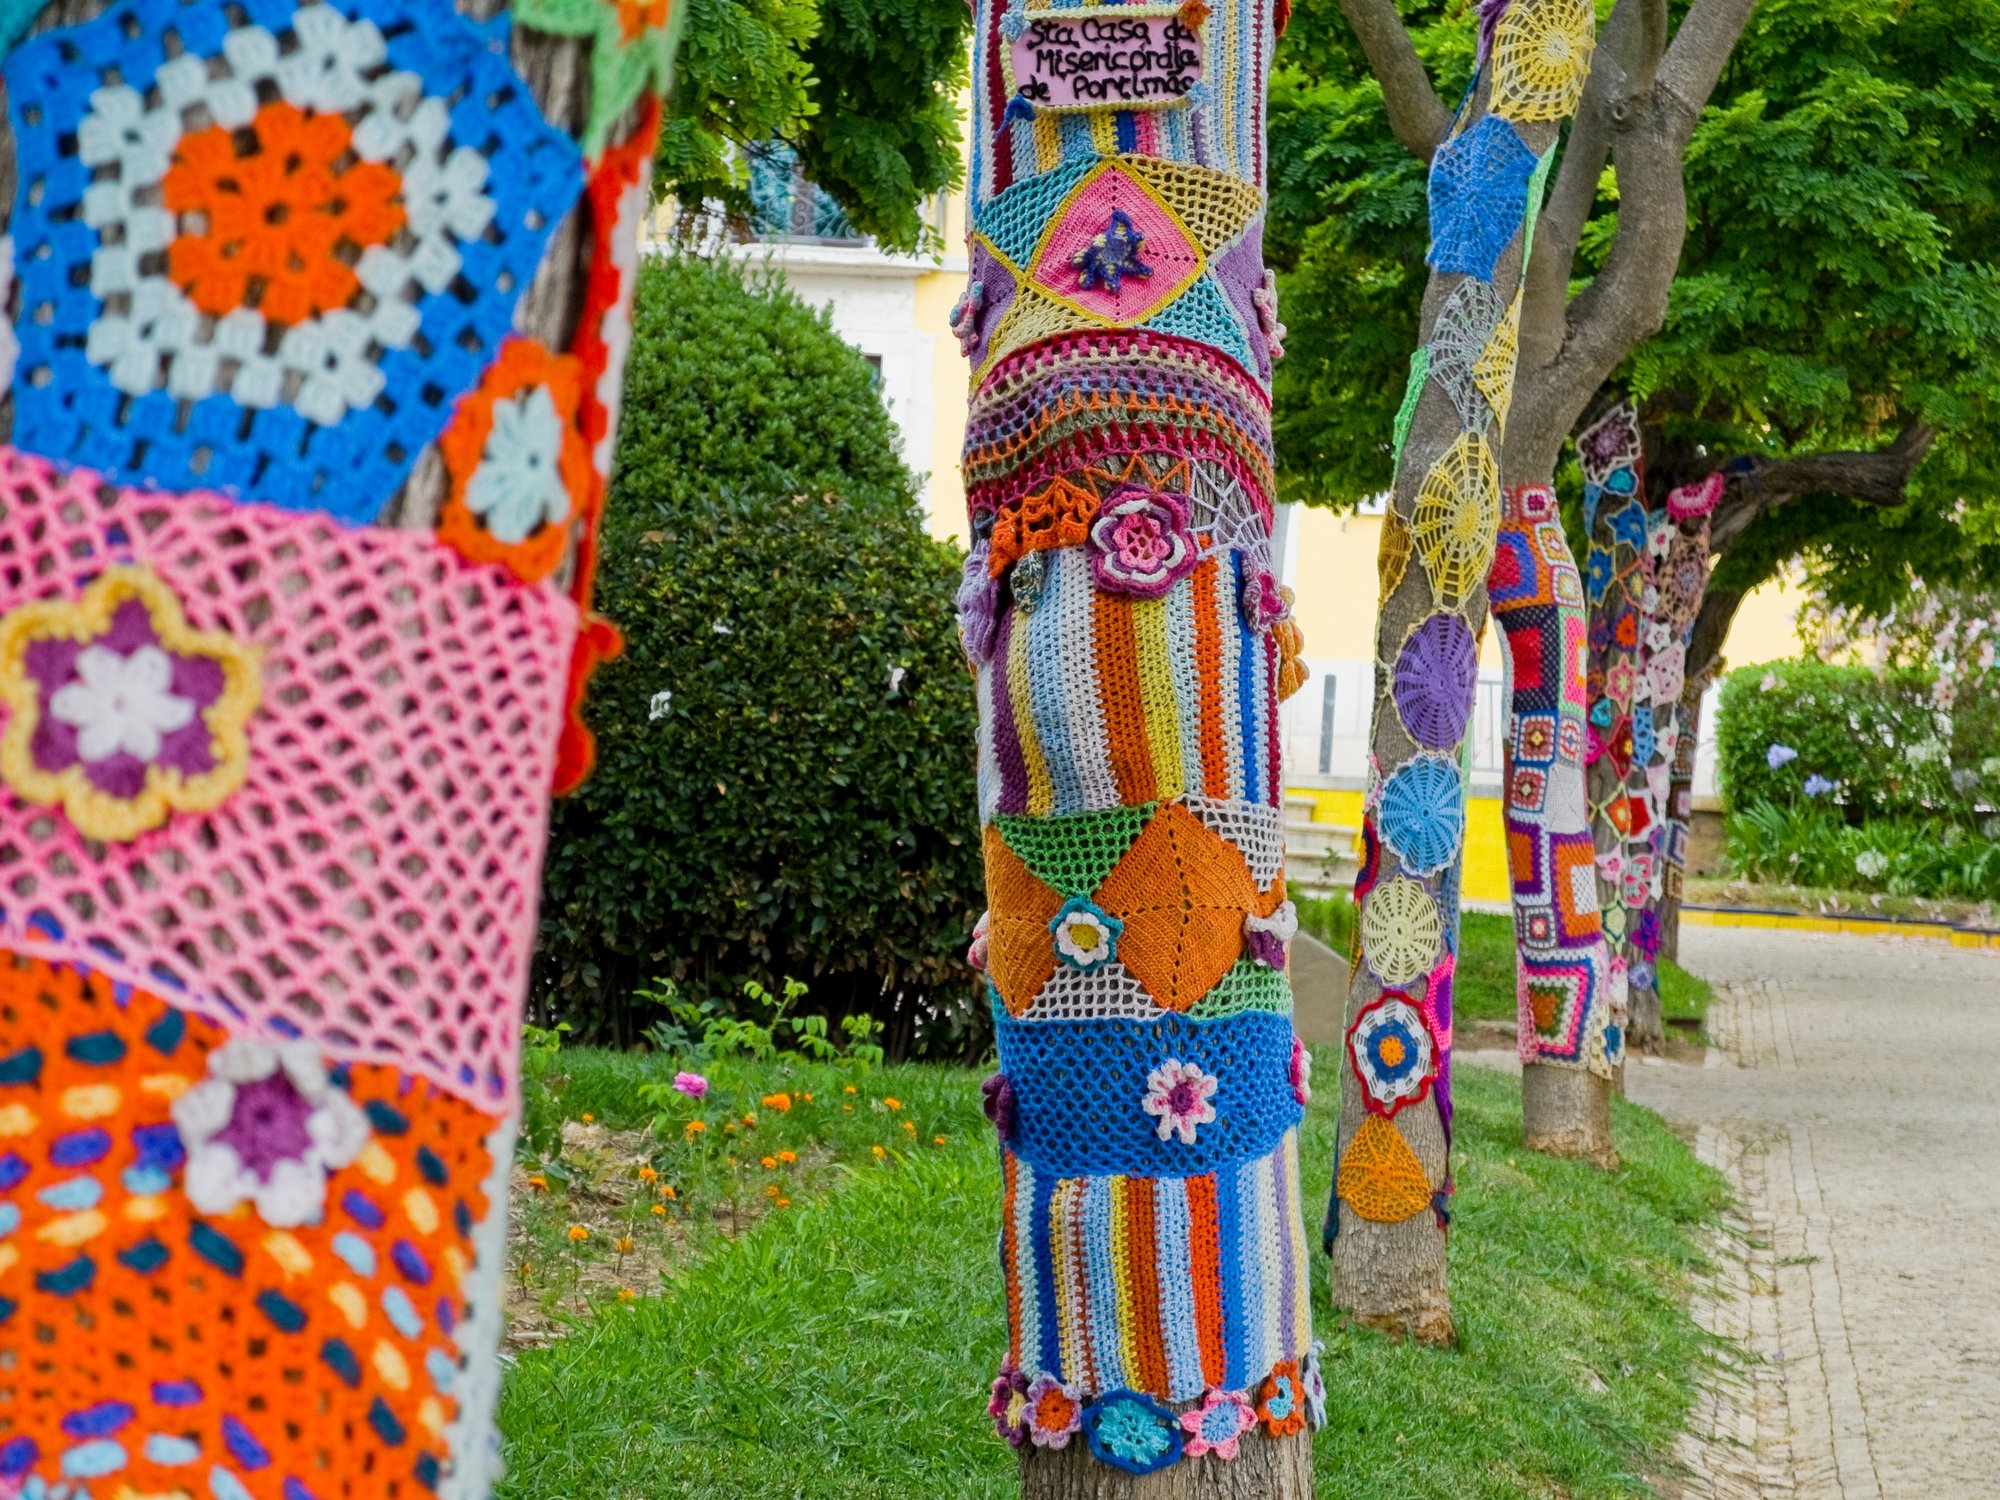 strange hobby of yarn bombin, row of trees next to a sidewalk, trees are covered in yarn decoratively knit around the trunk of the tree, 